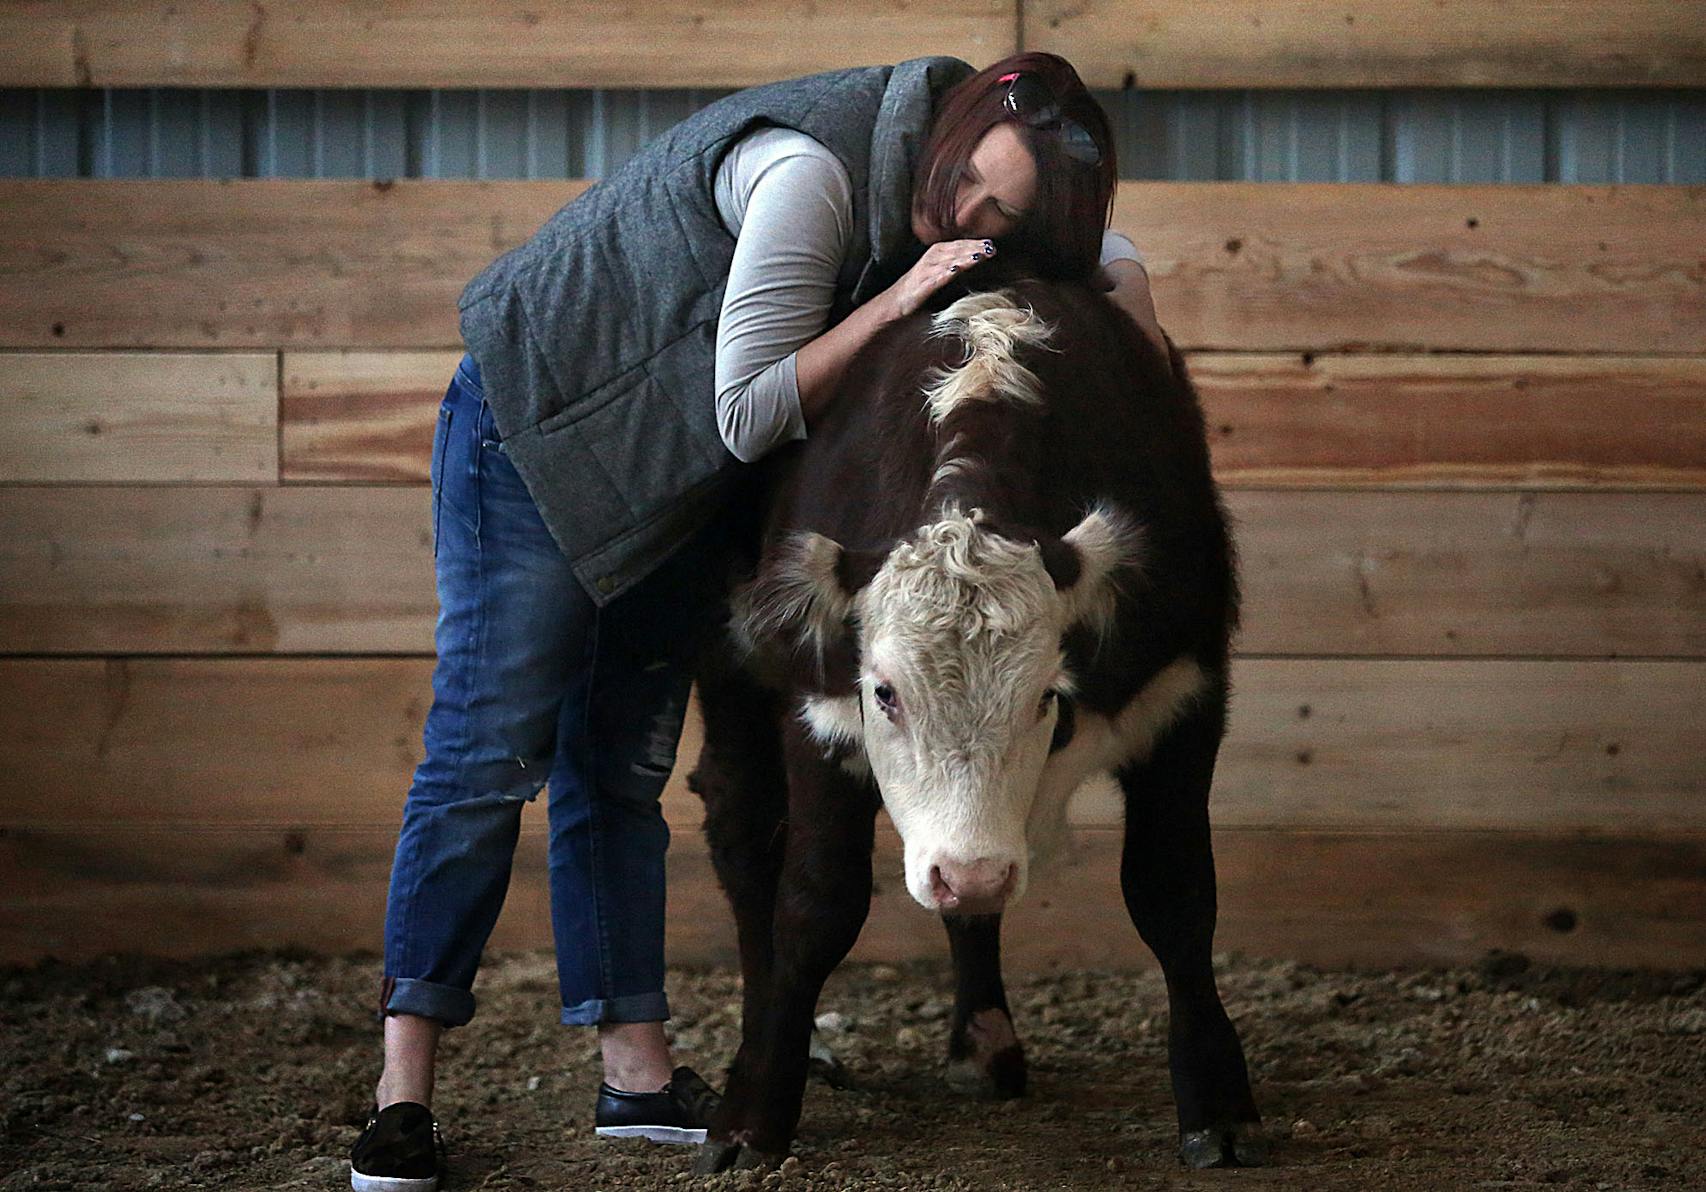 Sylvia Hilgeman playfully embraced a cow while helping with chores on the family farm in Oklee. Rural Minnesota has better schools than the U.S. average and less income inequality.